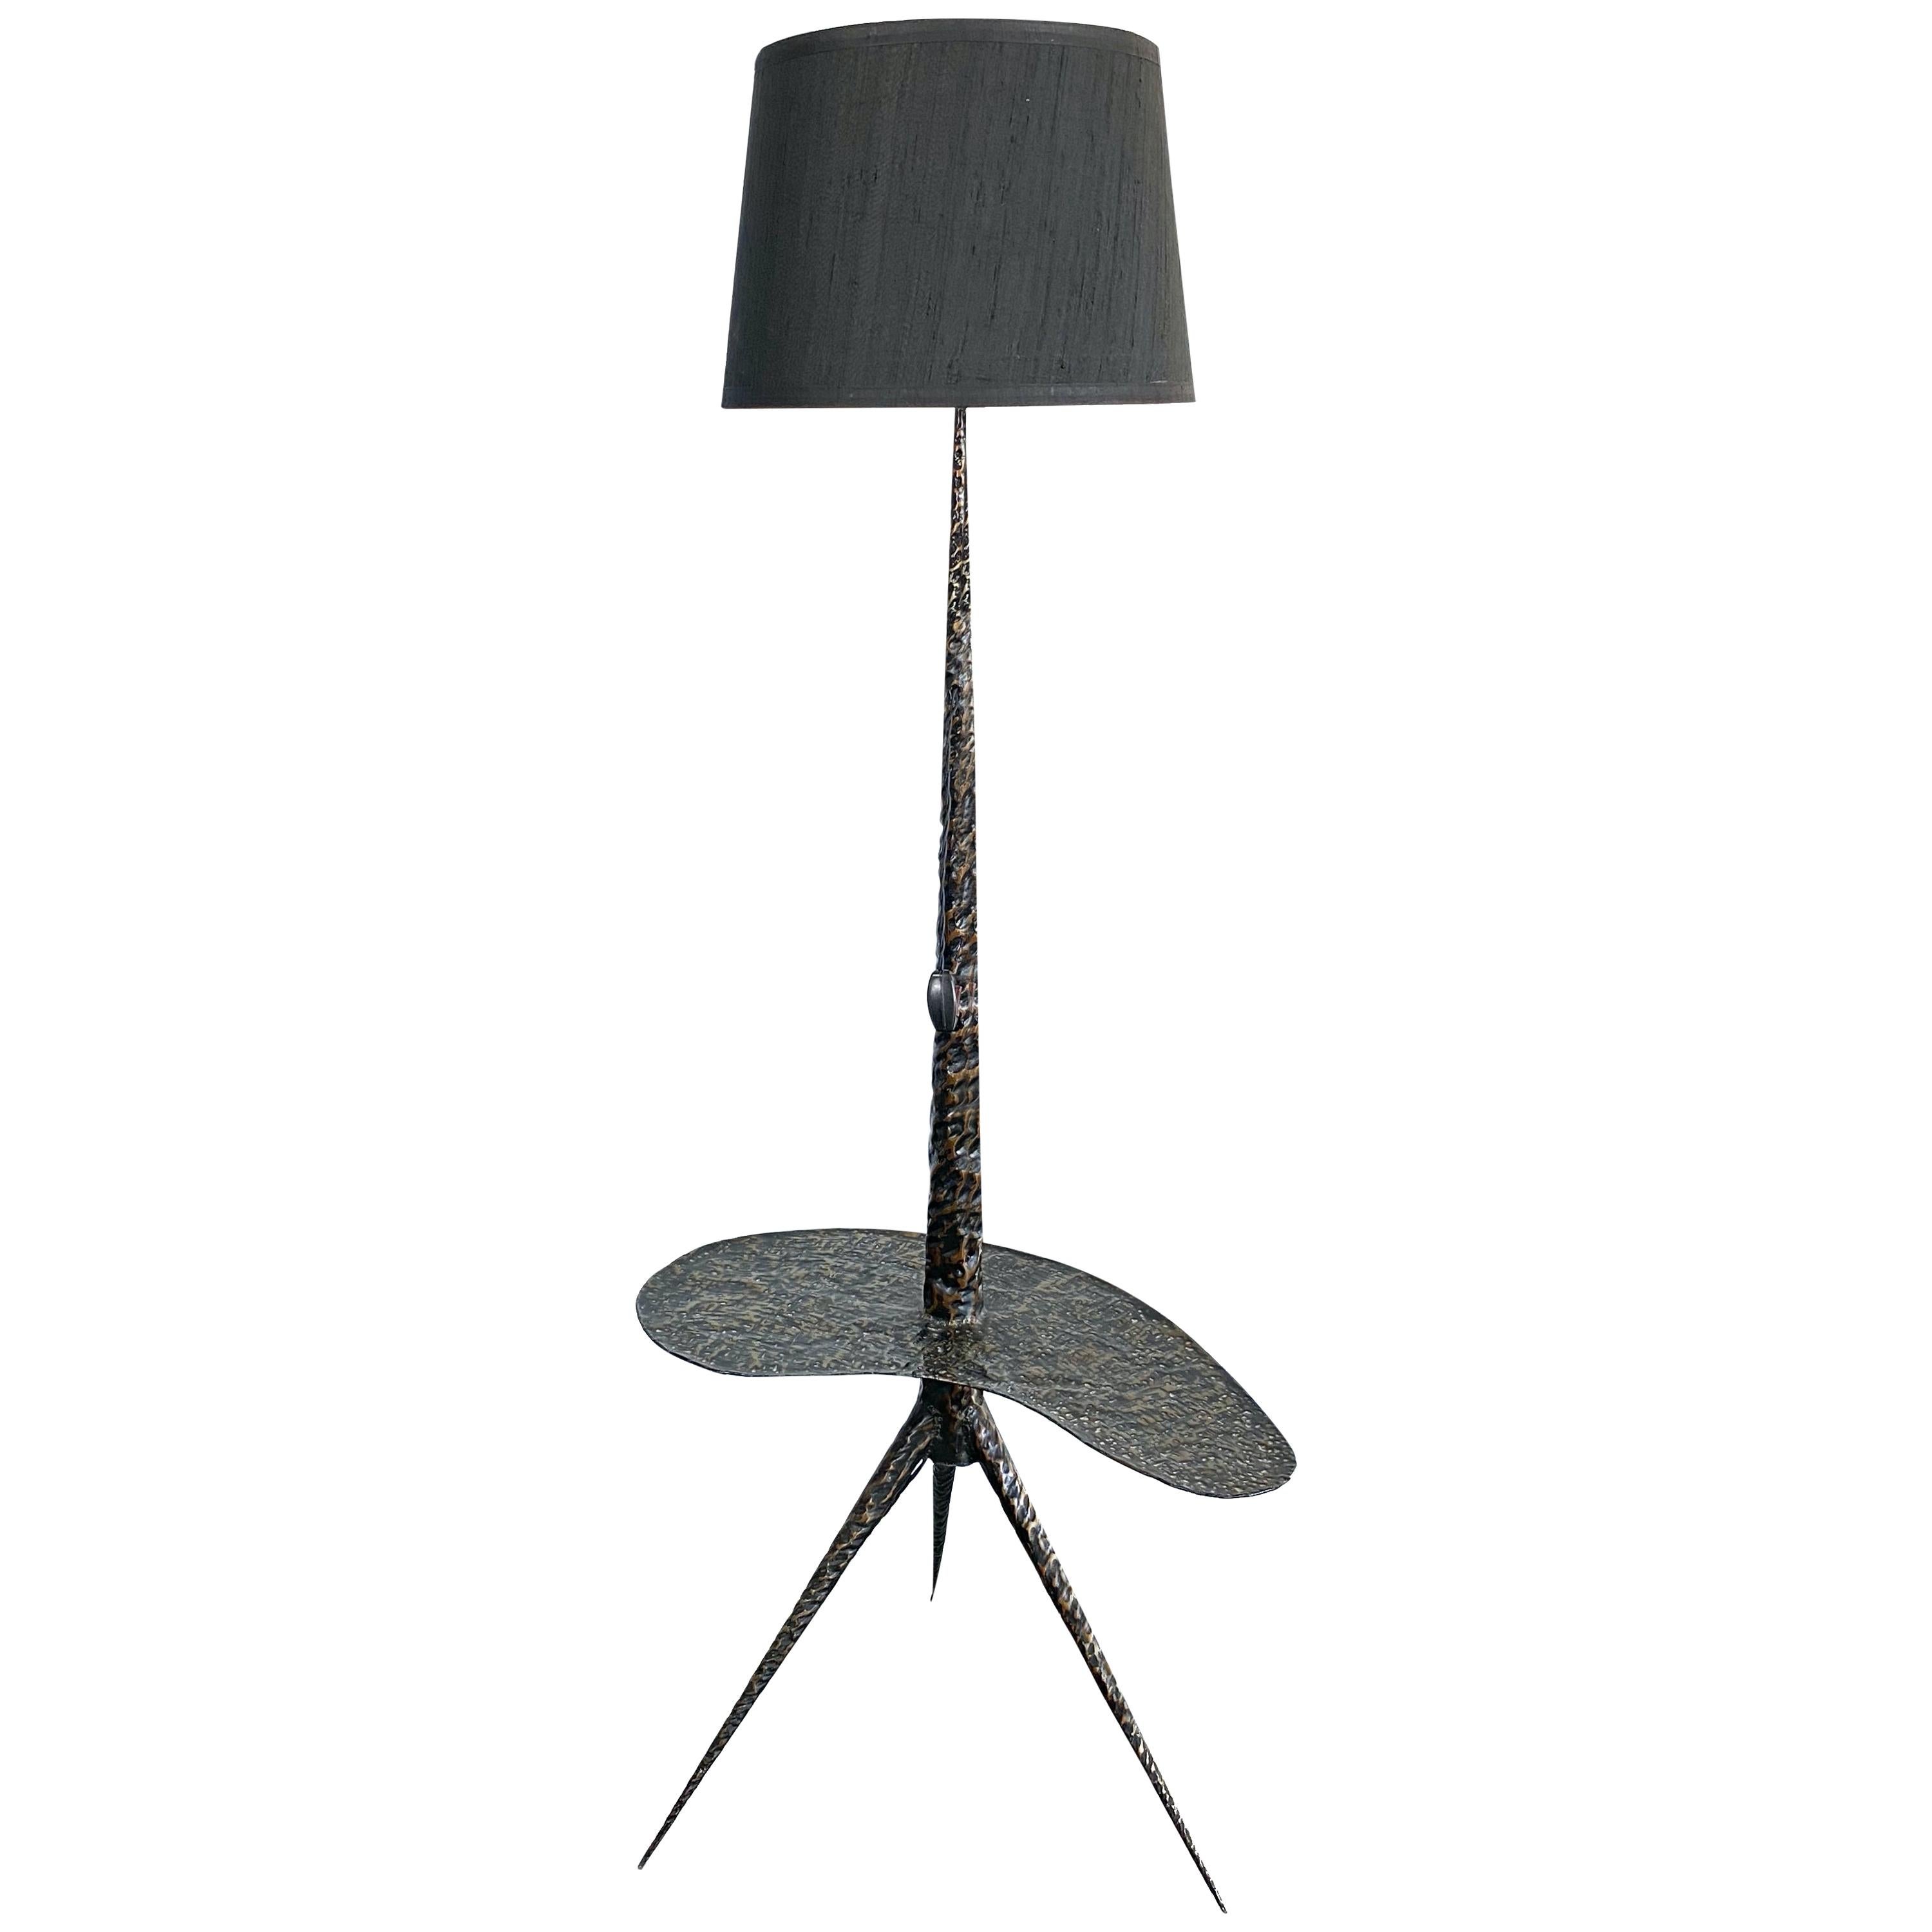 French Midcentury Brutalist Tripod Floor Lamp with Table, 1960s, France